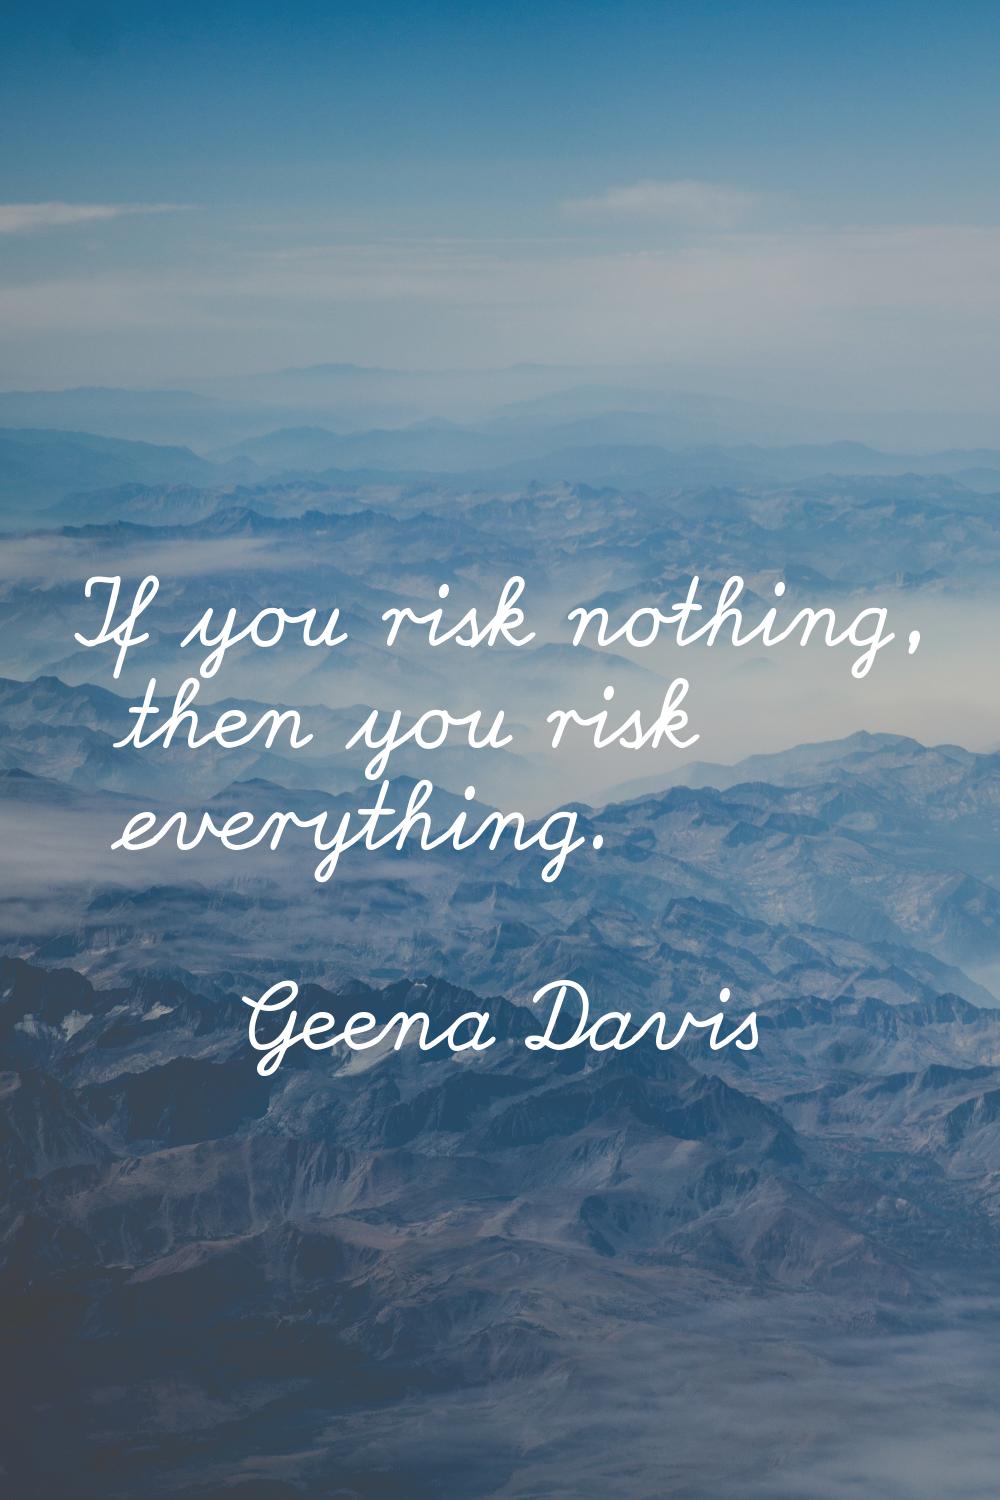 If you risk nothing, then you risk everything.